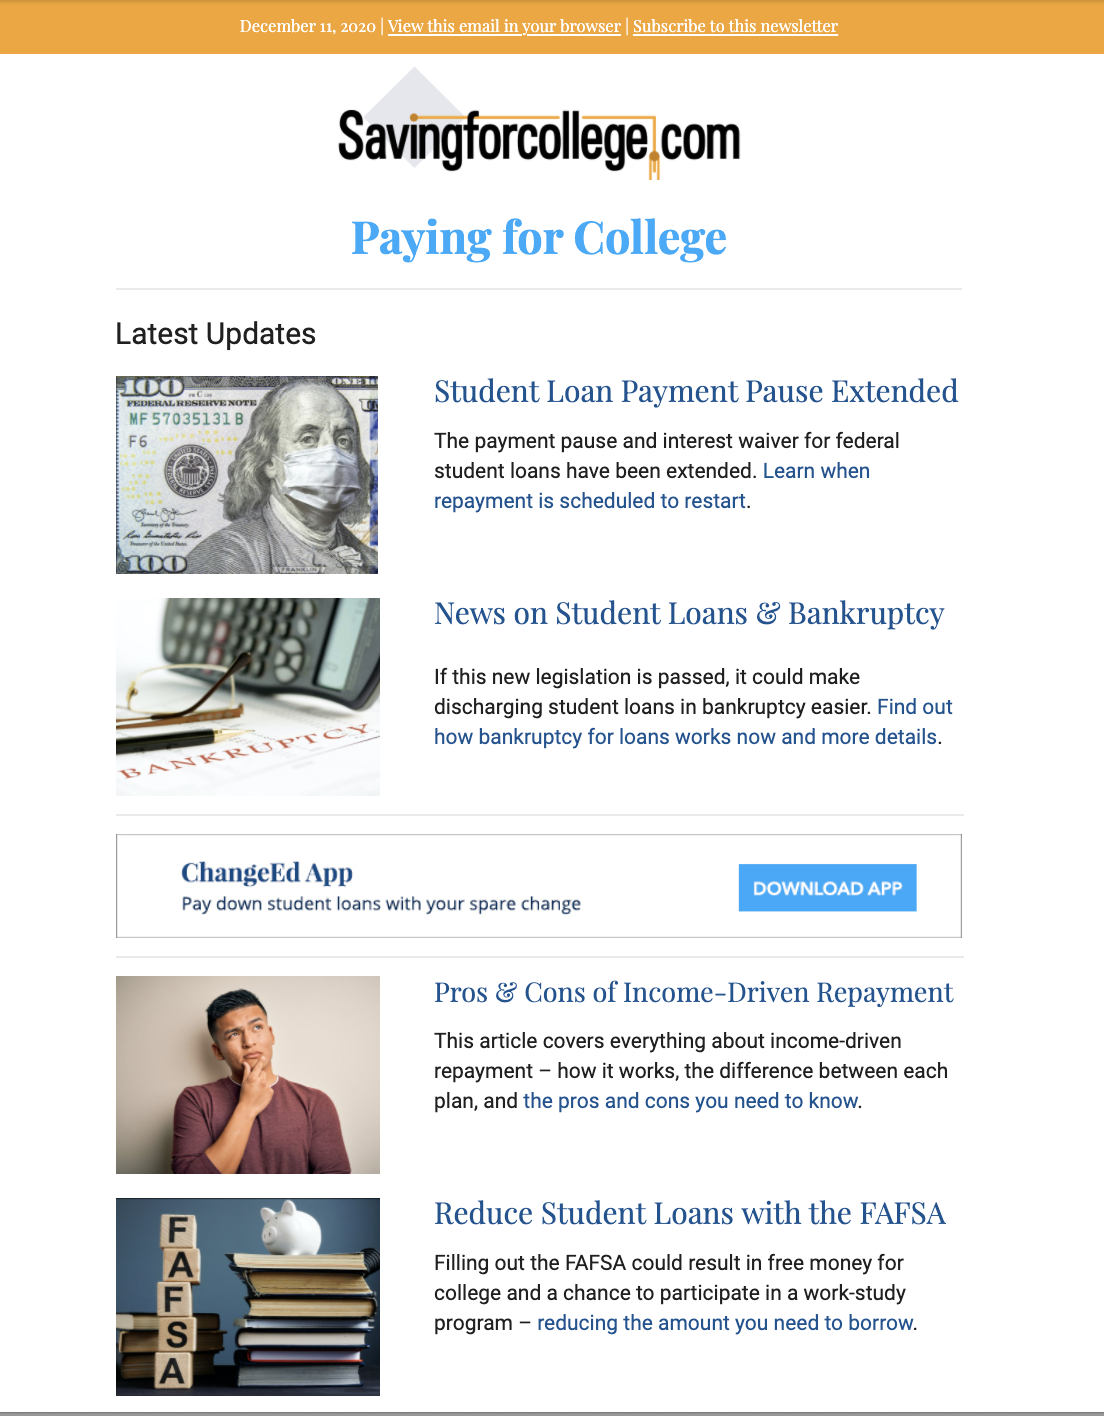 Paying for College Newsletter